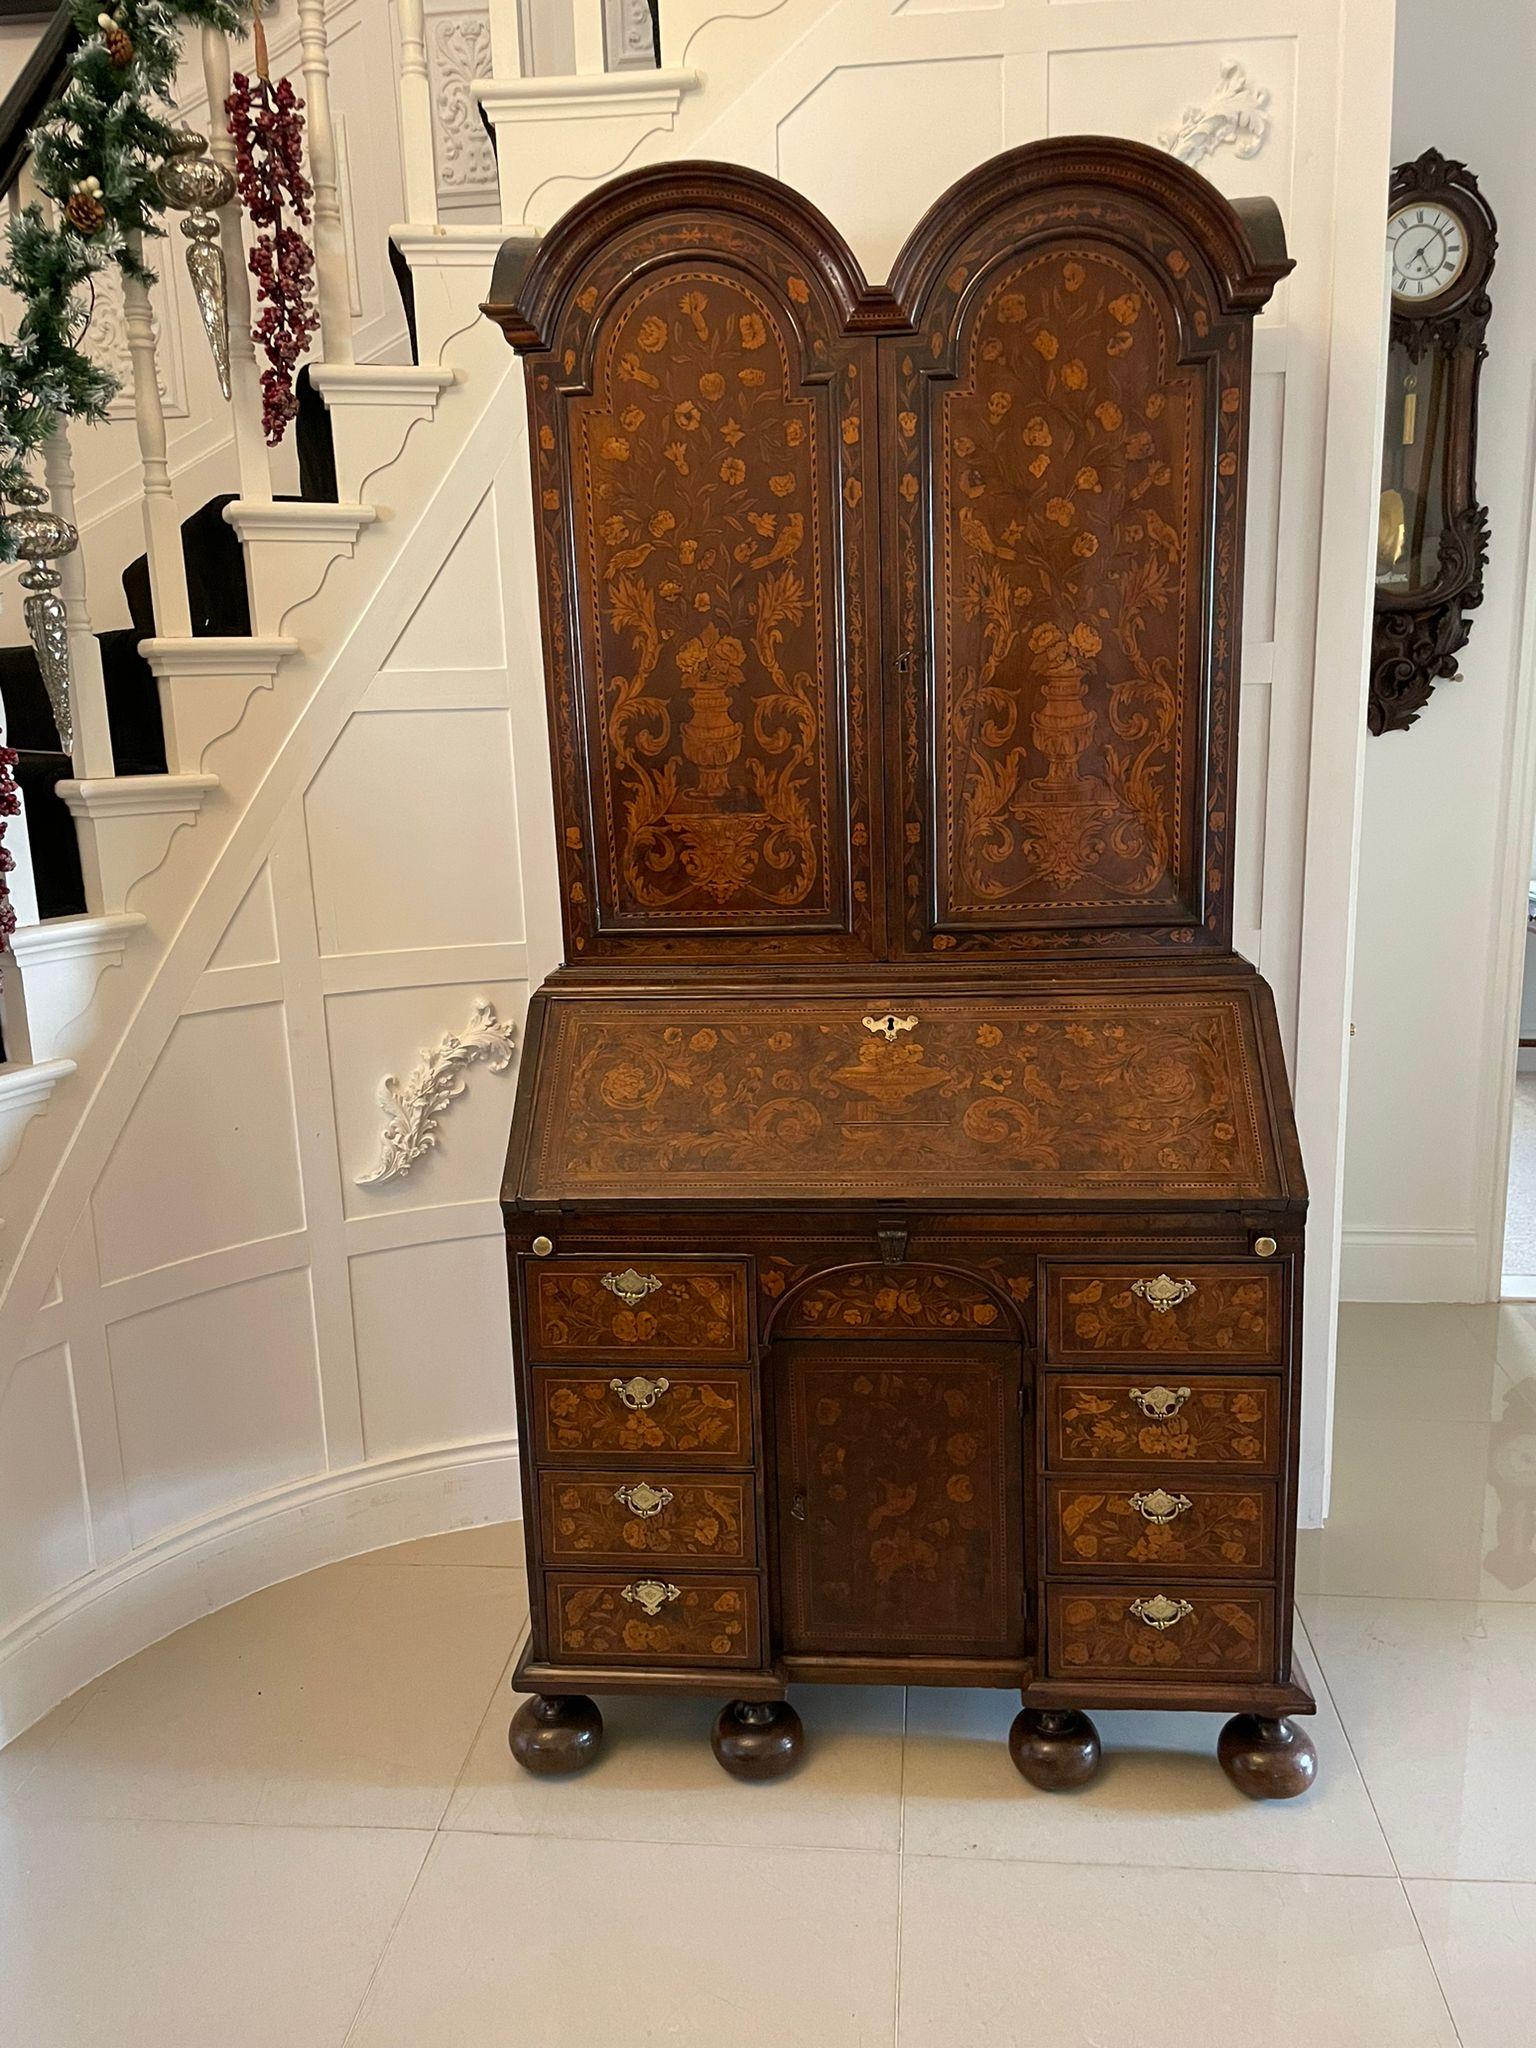 Antique William and Mary outstanding quality burr walnut inlaid marquetry double dome bureau bookcase having an outstanding quality double dome shaped top with a moulded cornice above a pair of burr walnut inlaid marquetry doors opening to reveal a